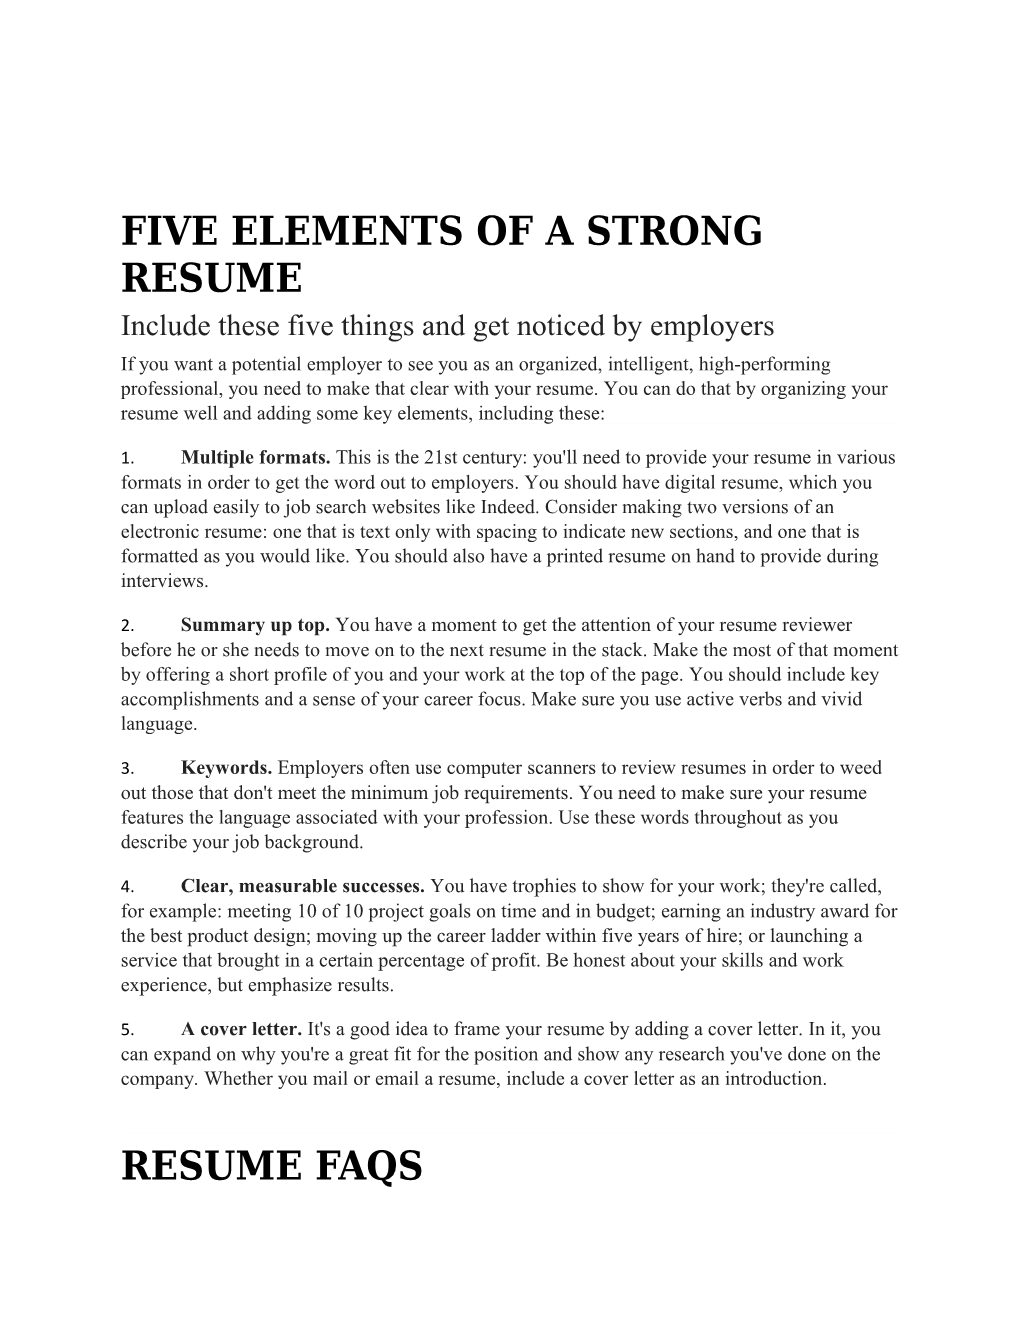 Five Elements of a Strong Resume